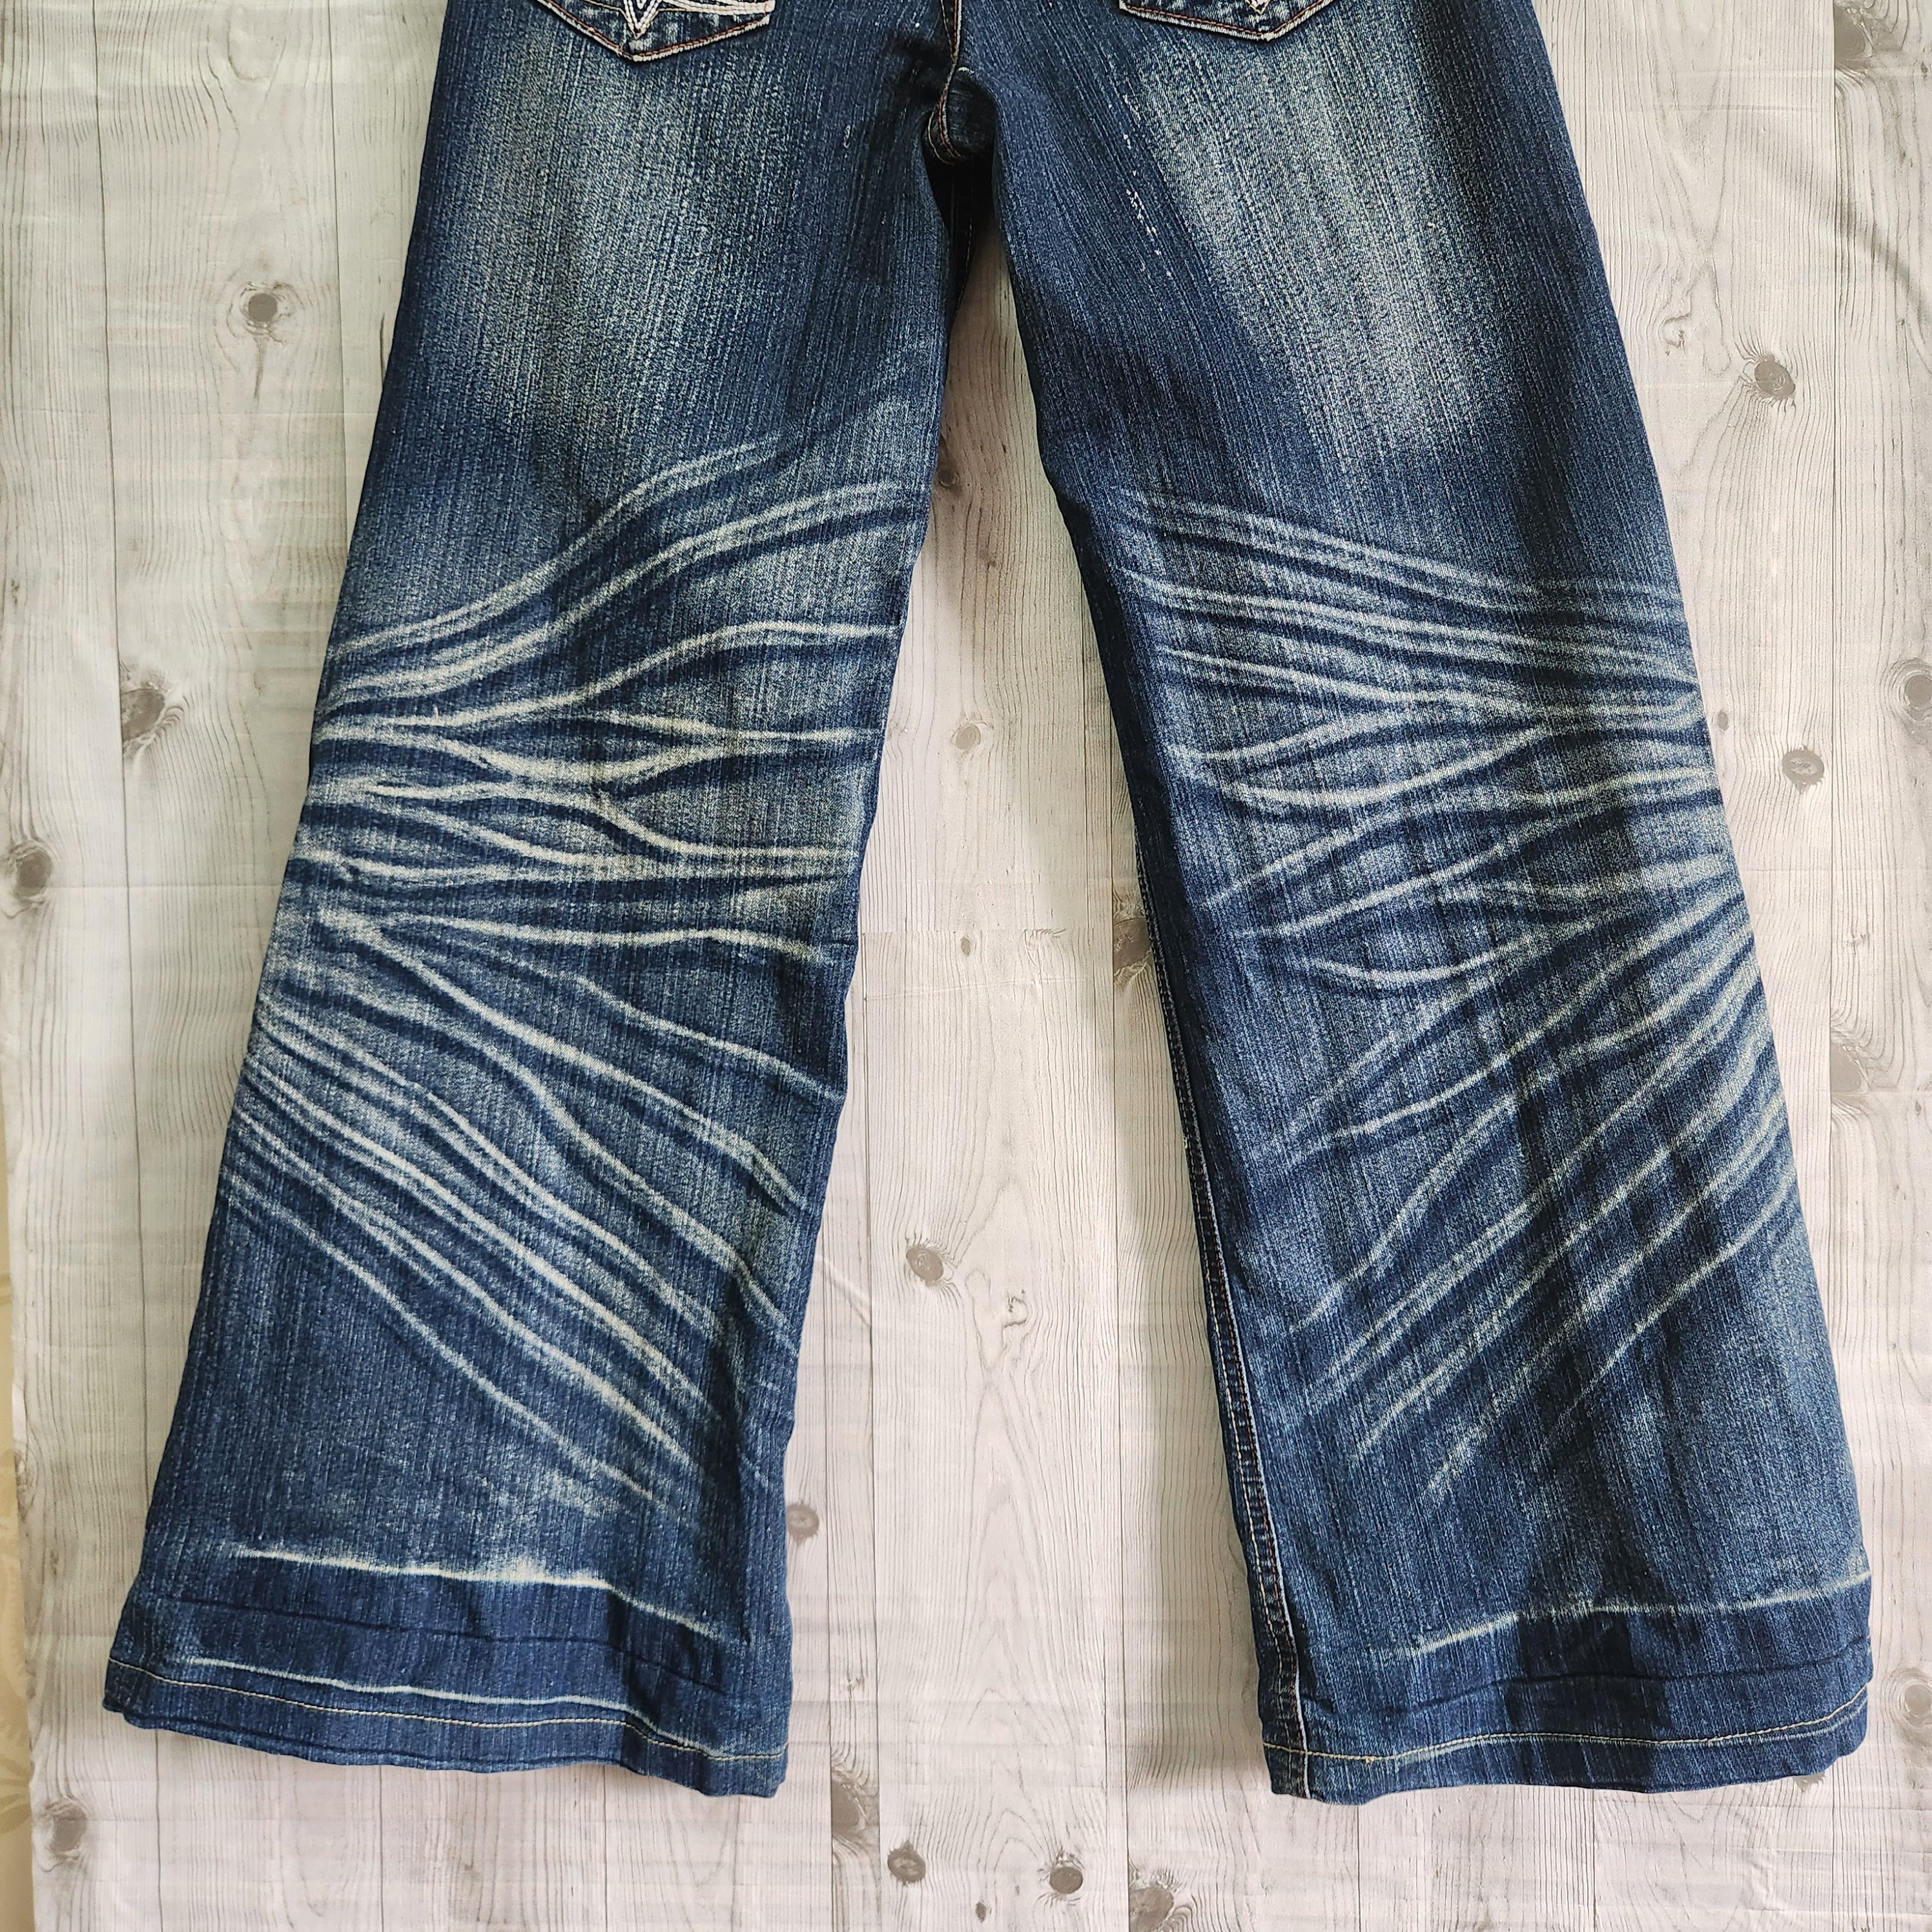 If Six Was Nine - Maxia M2368 Flare Denim Japanese Jeans - 12